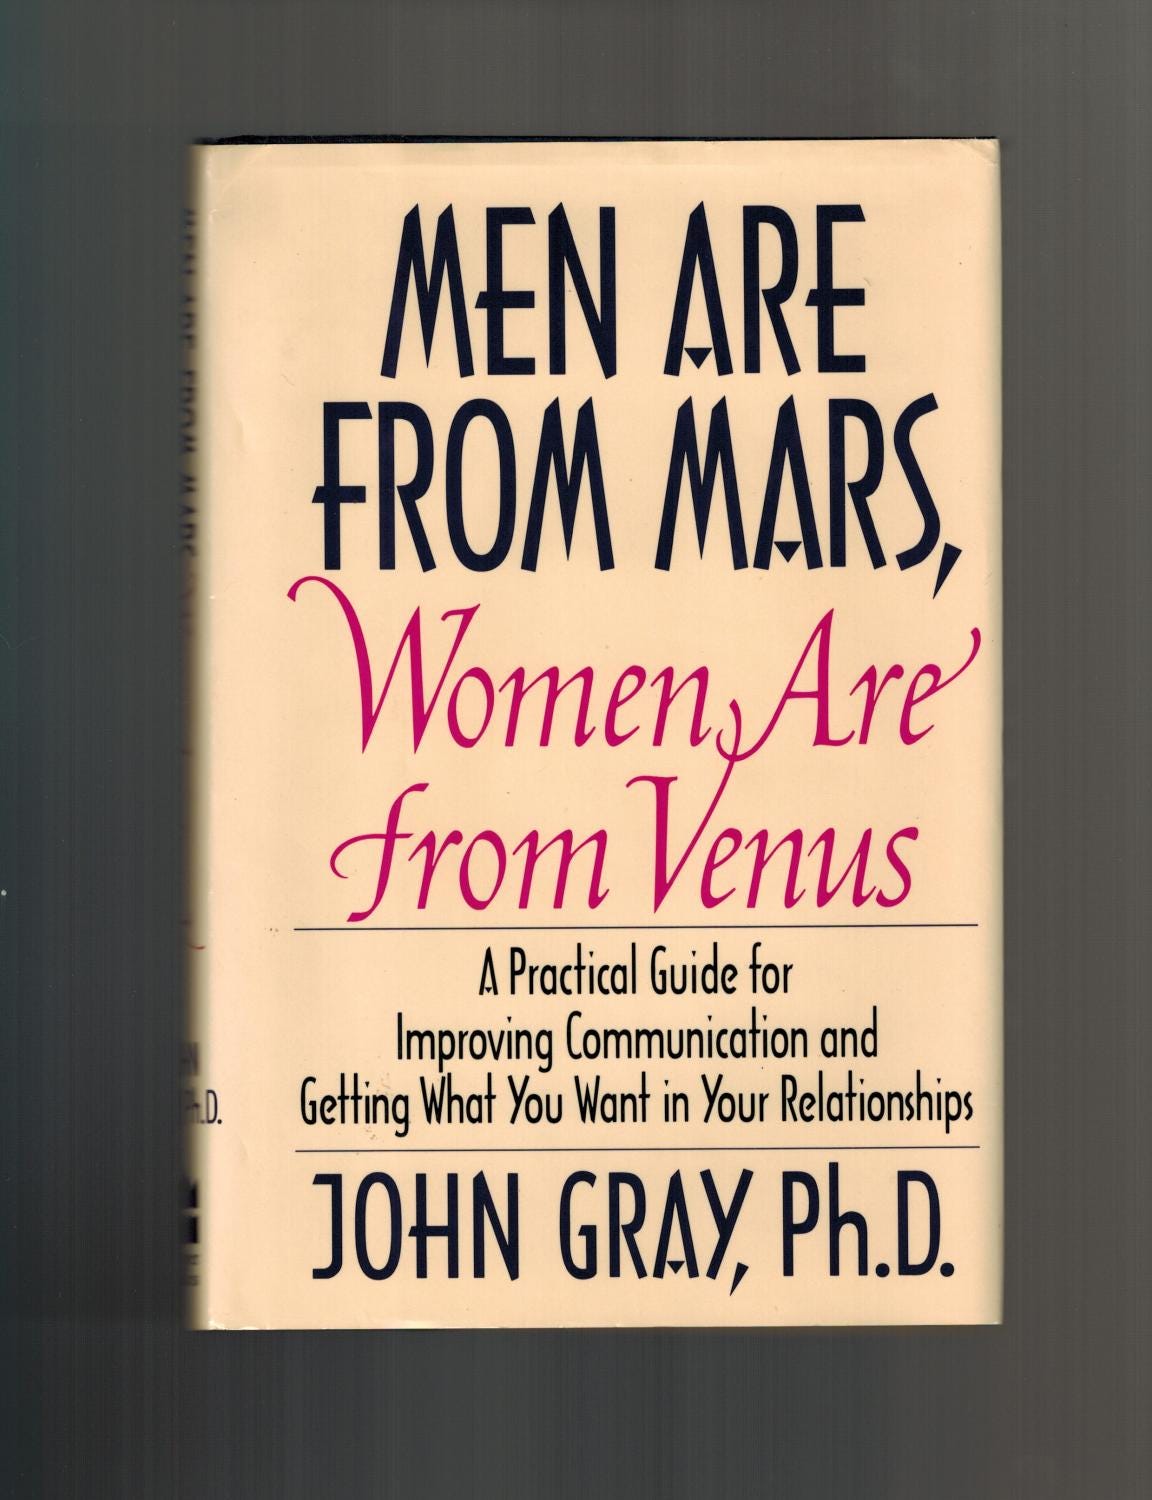 Men Are from Mars, Women Are from Venus: A Practical Guide for Improving  Communication and Getting What You Want in Your Relationships by John Gray:  As New Hardcover (1992) 1st Edition. |